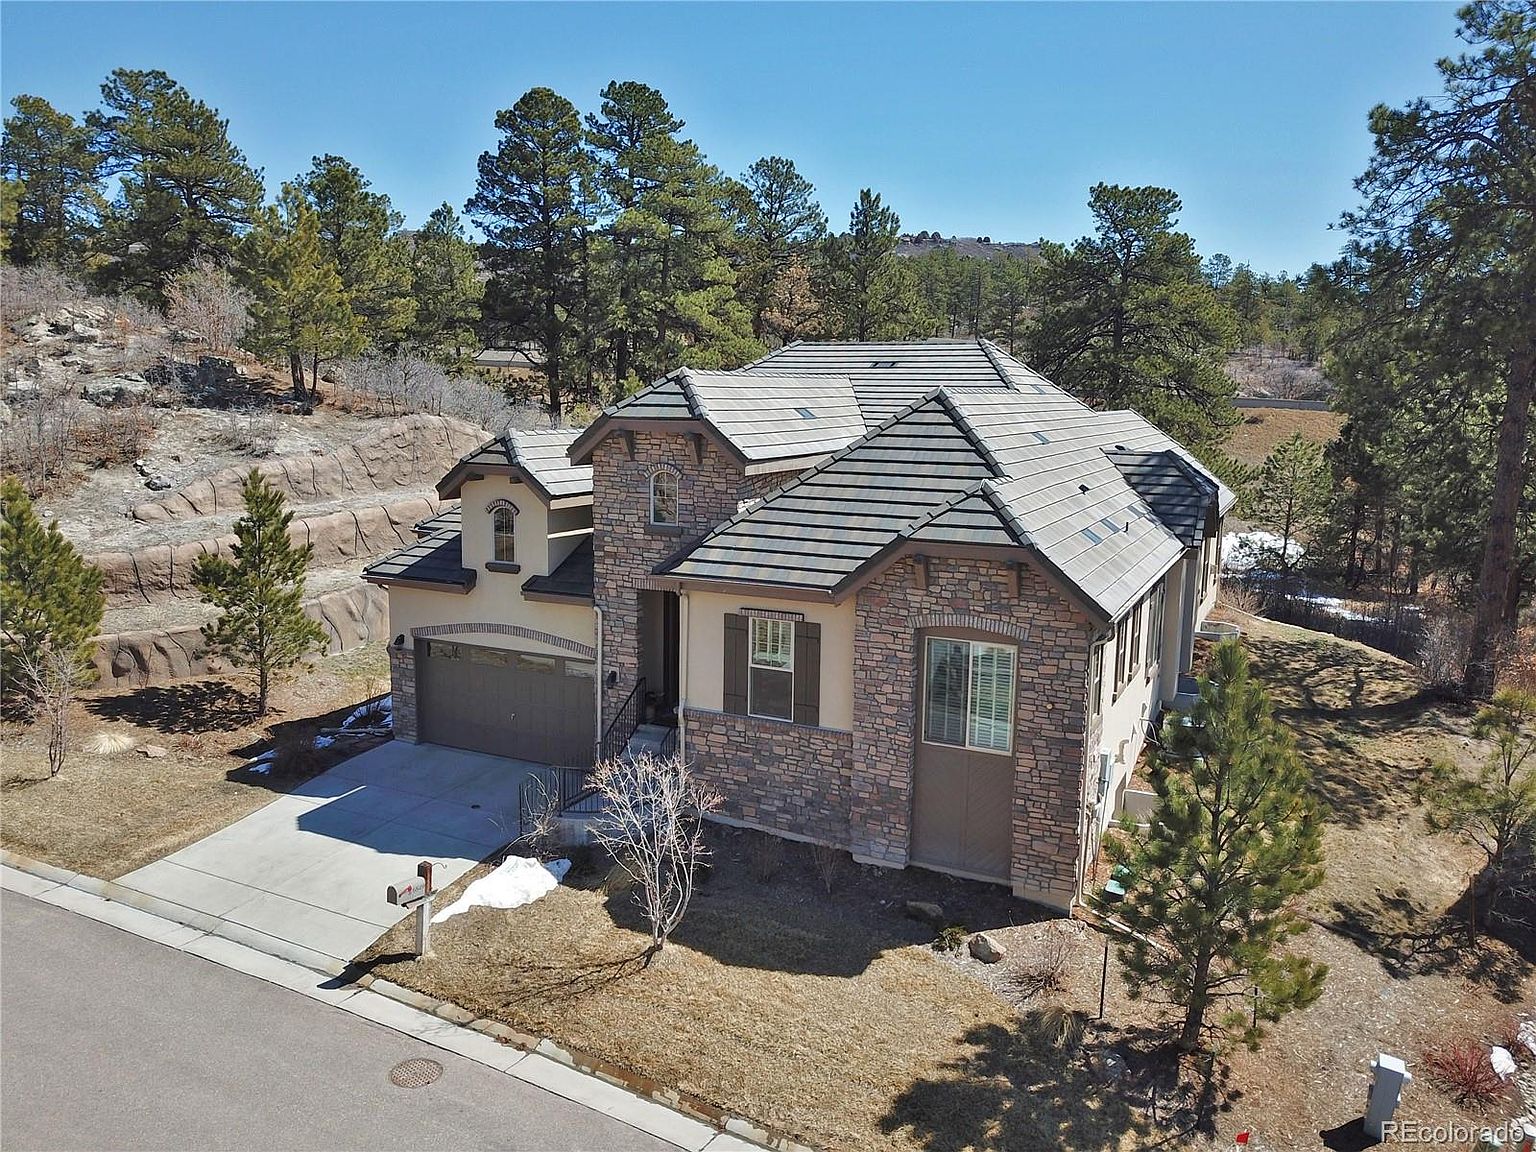 6849 Northstar Circle, Castle Rock, CO 80108 | MLS #7953817 | Zillow